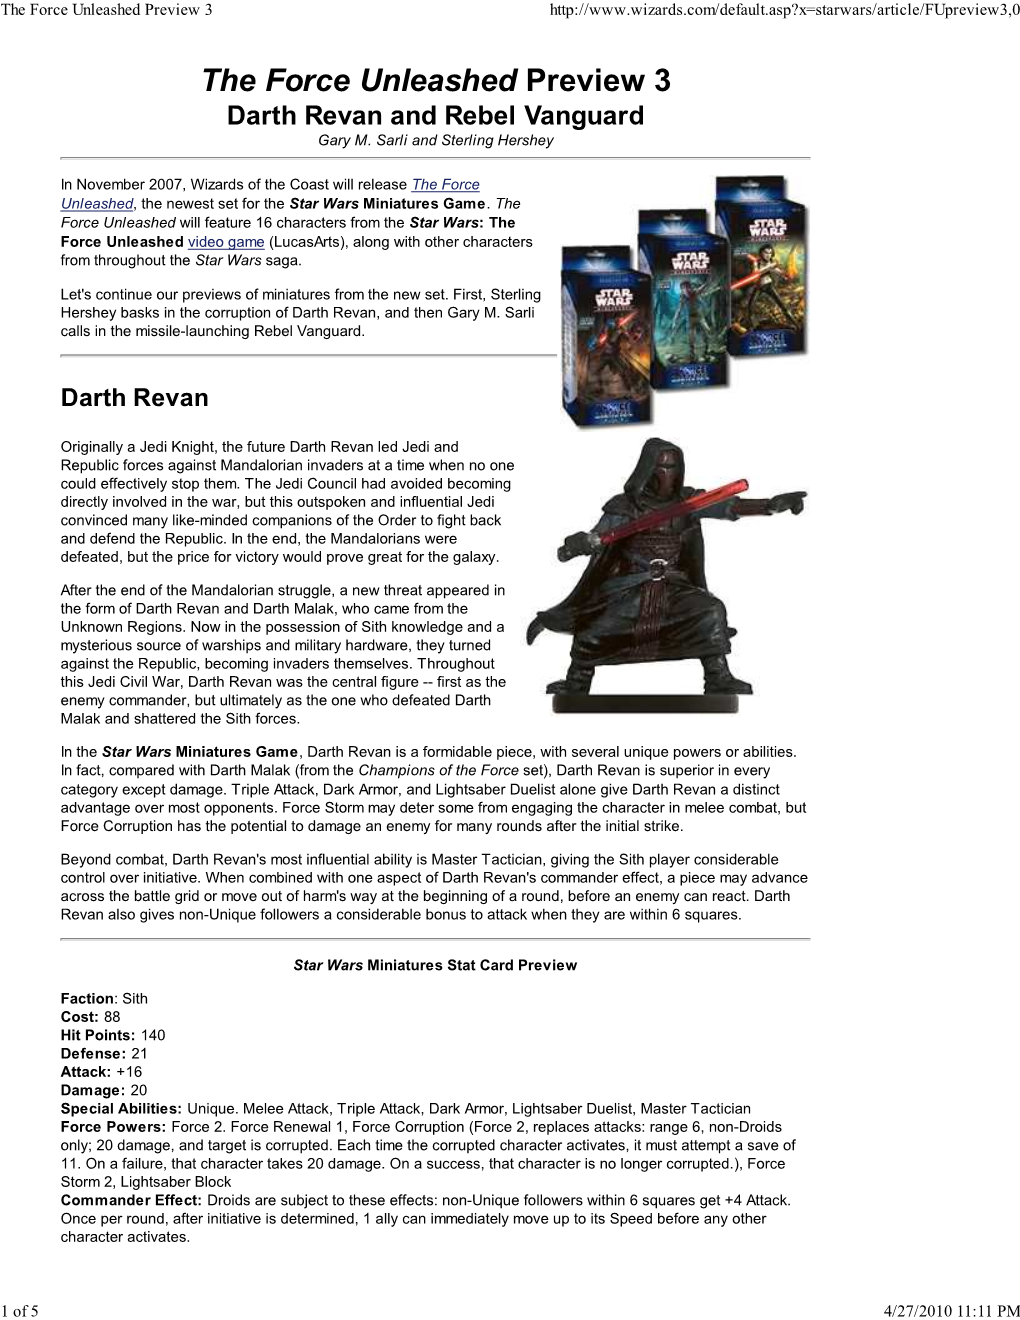 The Force Unleashed Preview 3